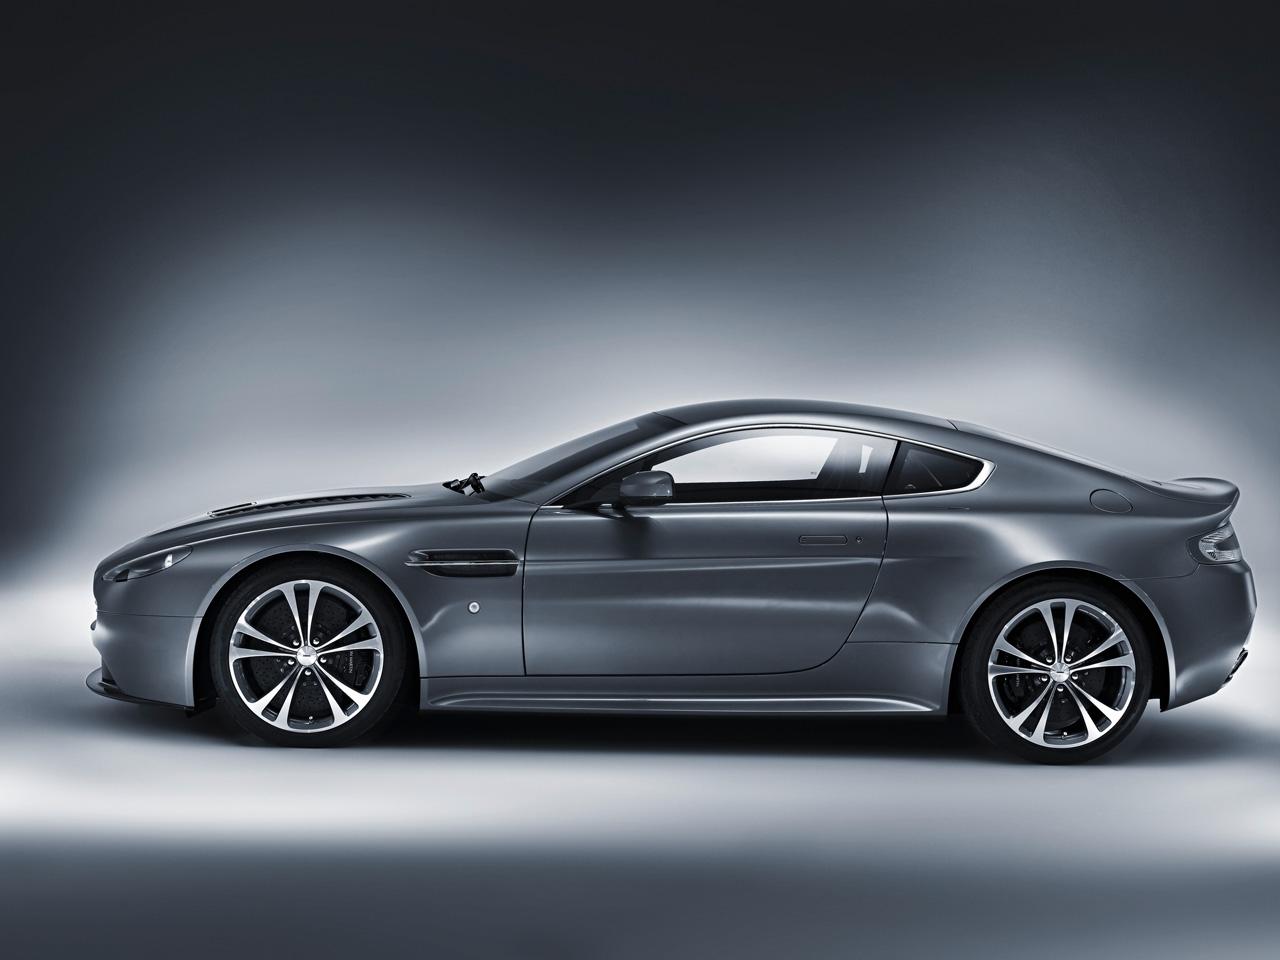 2010 Aston Martin V12 Vantage technical and mechanical specifications